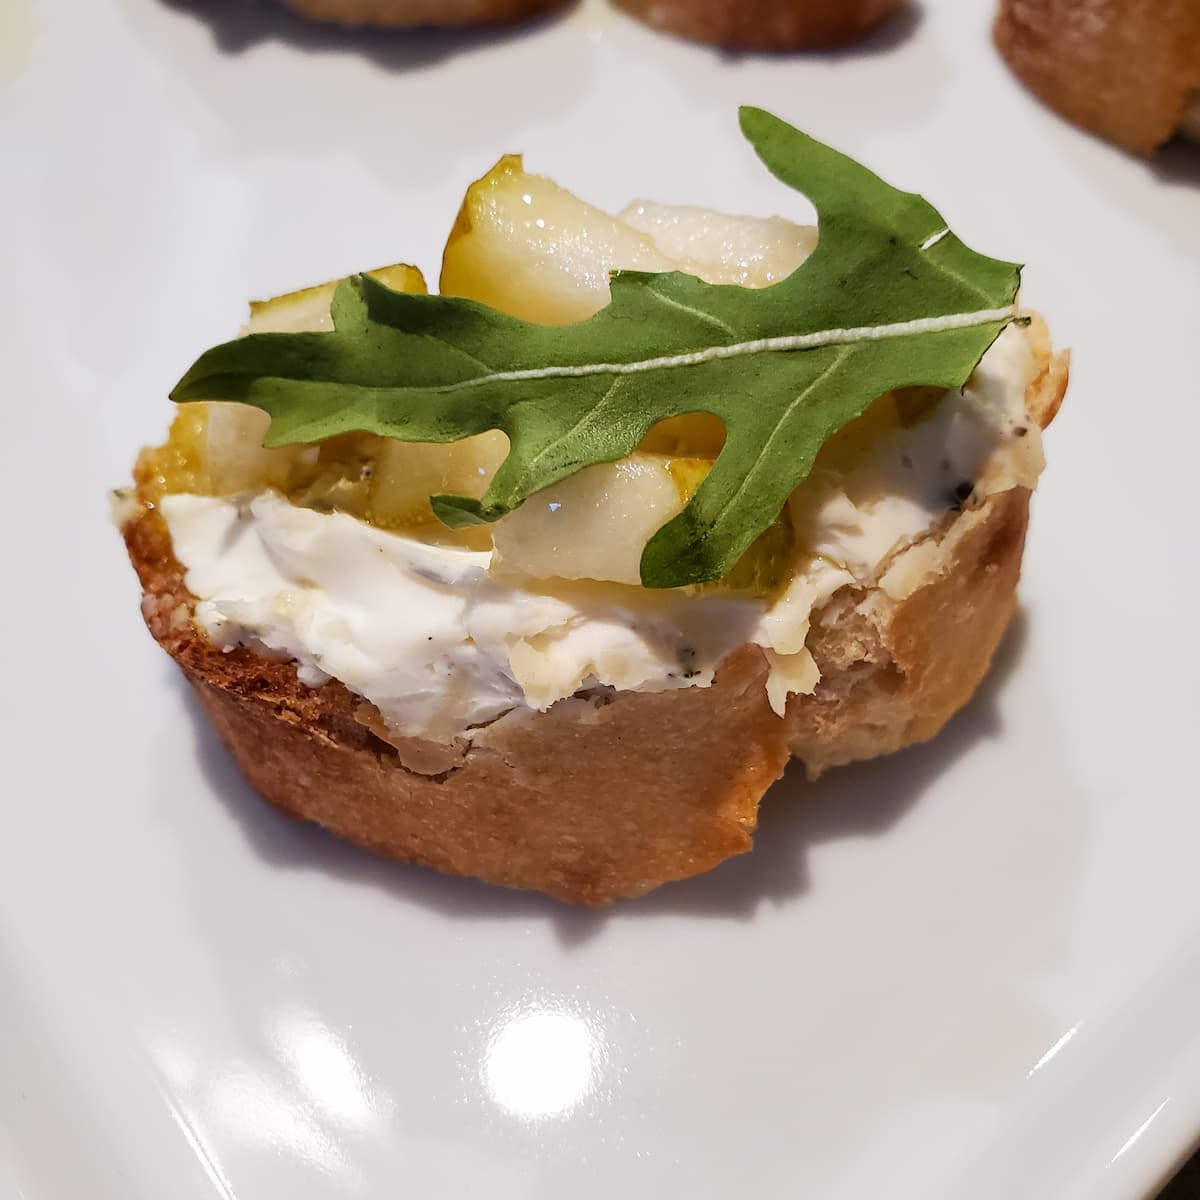 Pear and arugula baguette. A toasted baguette with thyme and black pepper cream cheese, diced pears, and arugula. Recipe from cleveland cooking